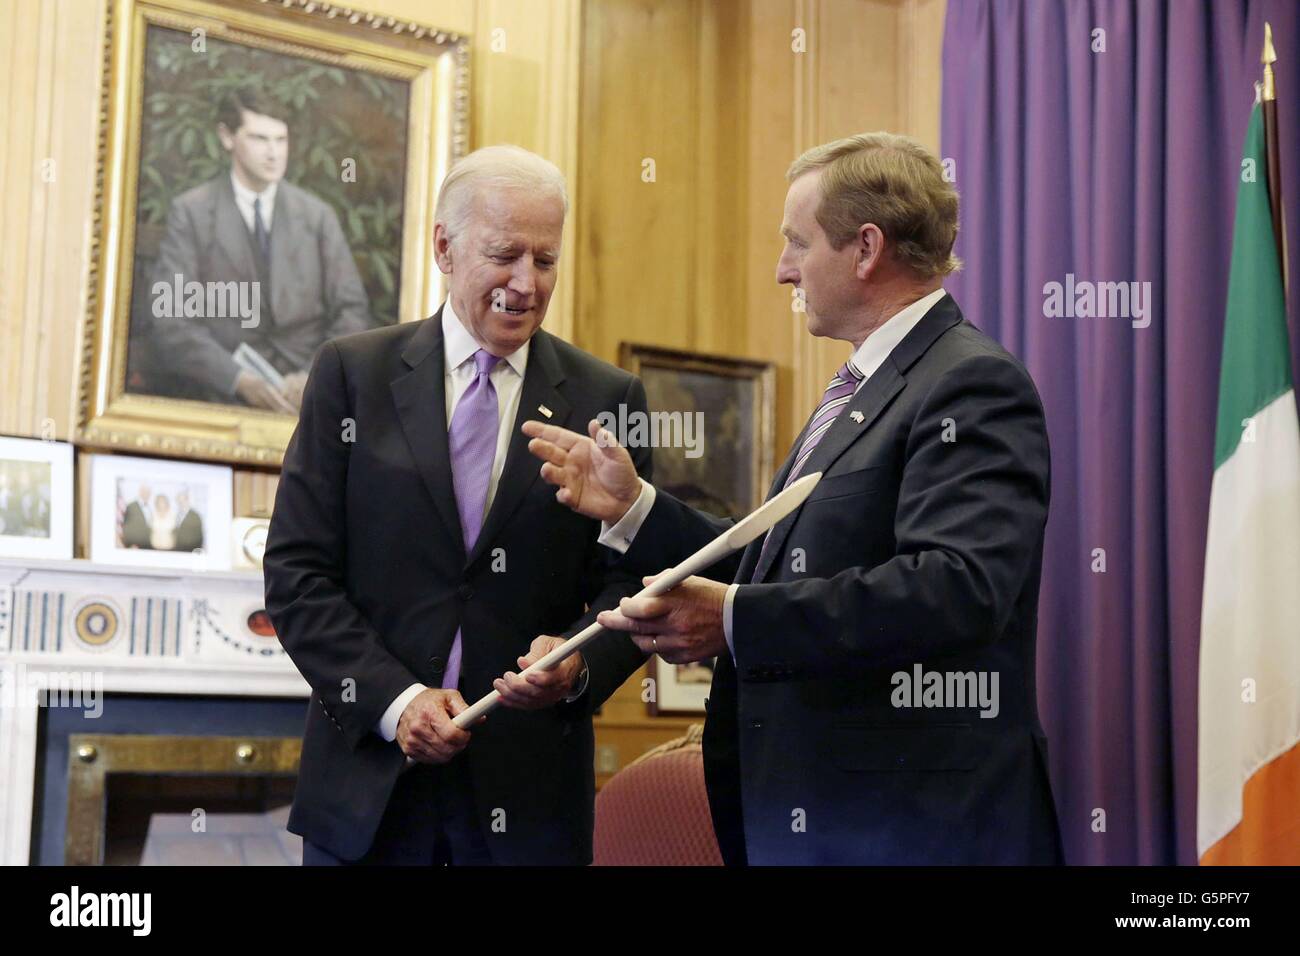 U.S. Vice President Joe Biden is given a cricket bat by Taoiseach Enda Kenny before their bilateral meeting at the government building June 21, 2016 in Dublin, Ireland. Stock Photo